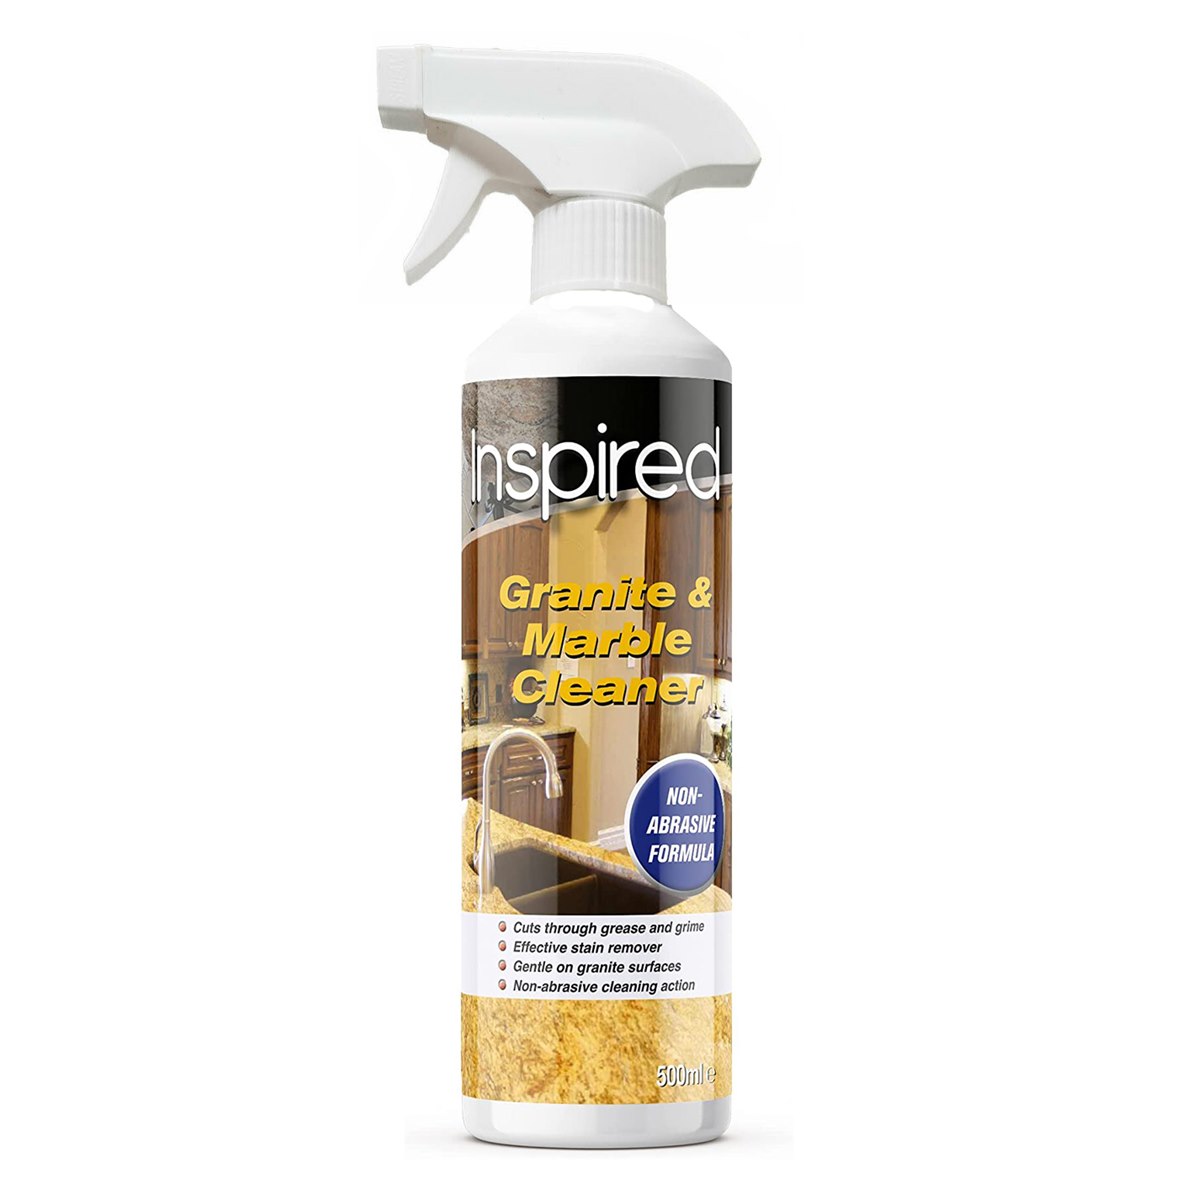 Inspired Granite and Marble Cleaner Spray 500ml